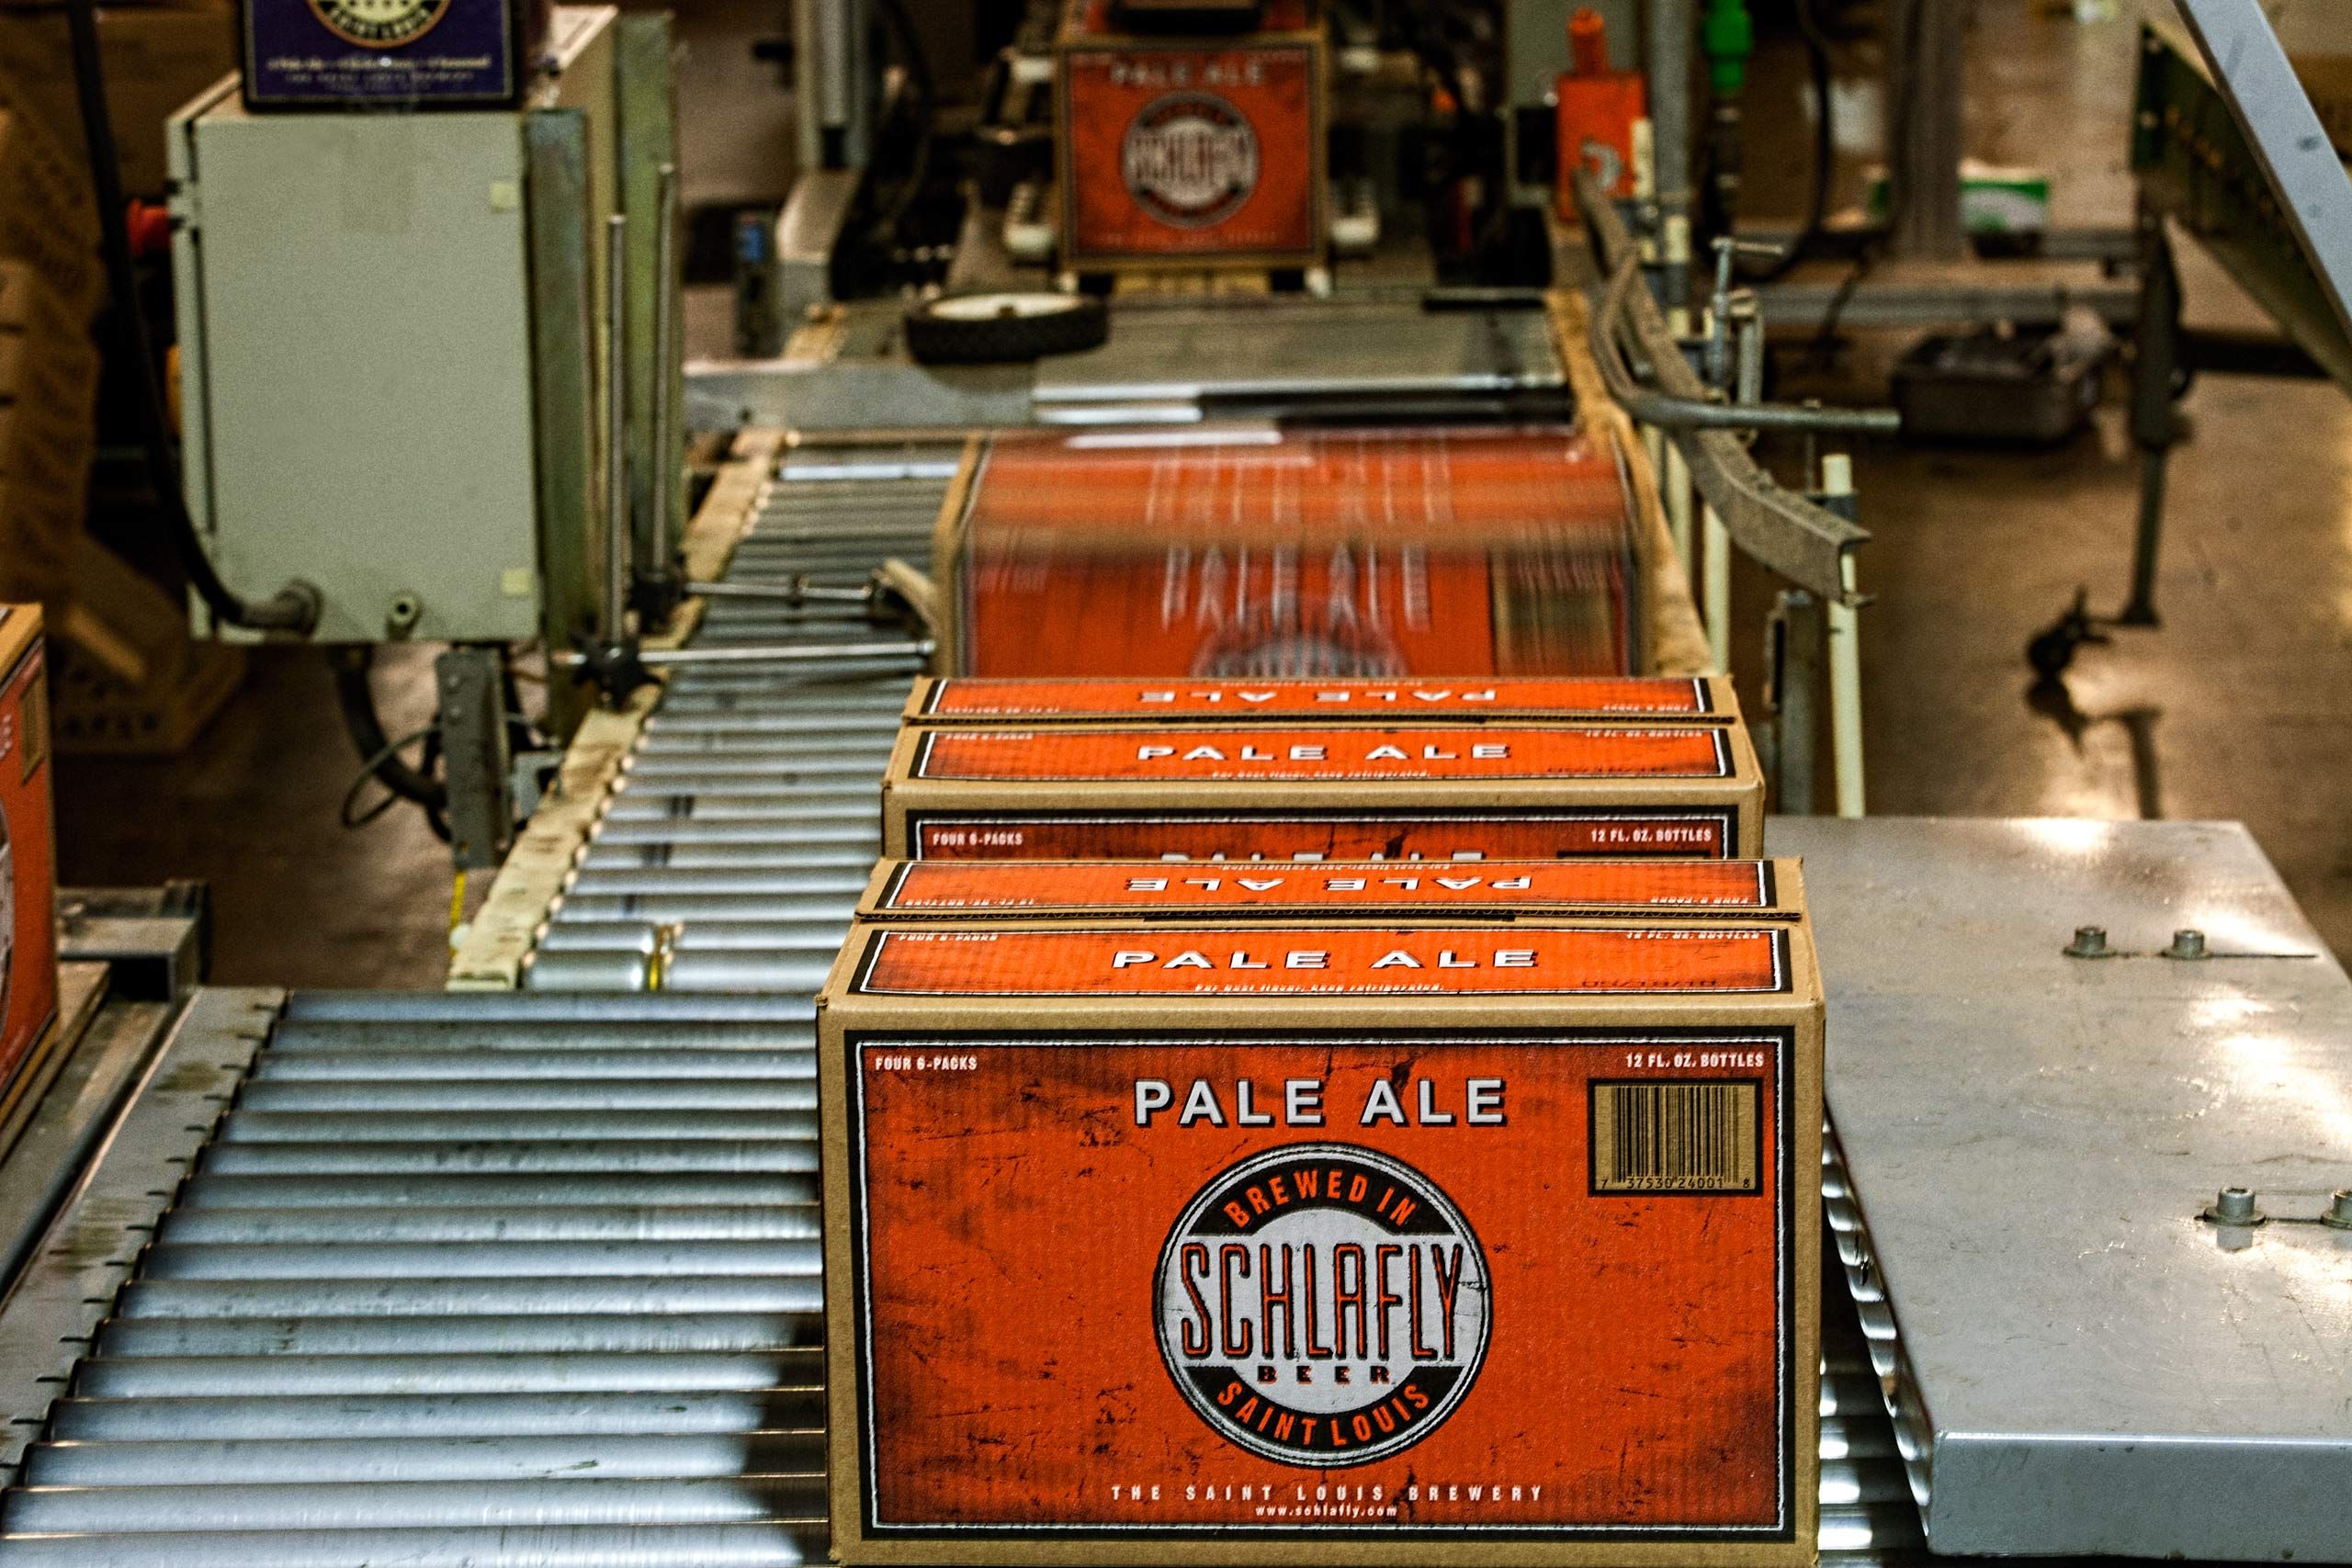 Cases of Beer on Production Line